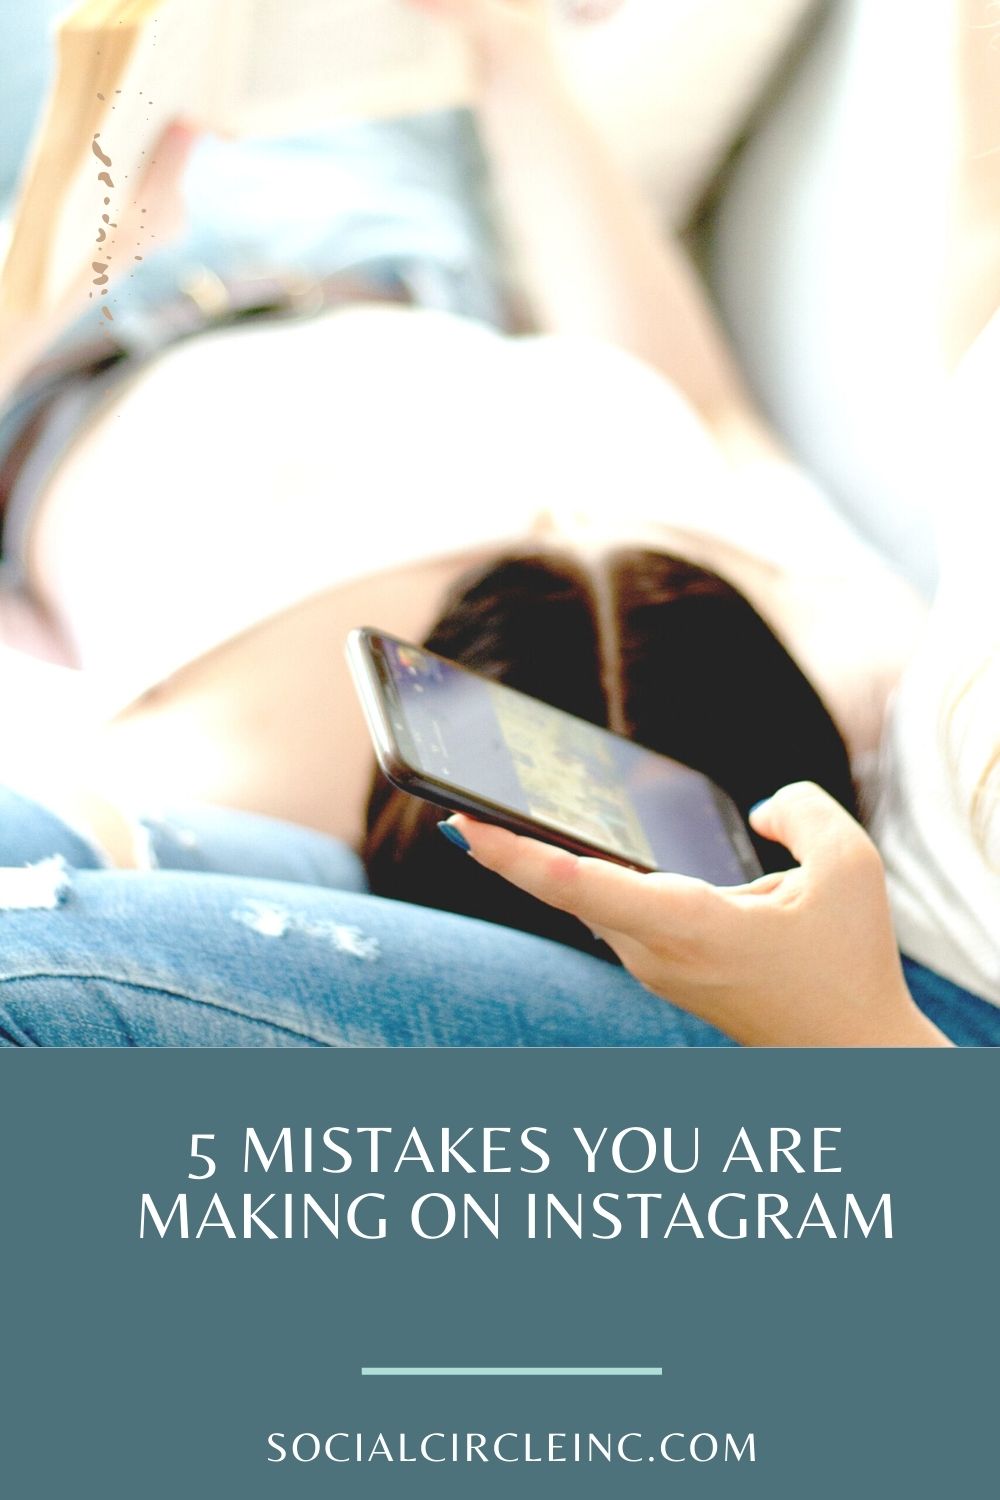 5 Common Instagram Mistakes & How to Fix Them